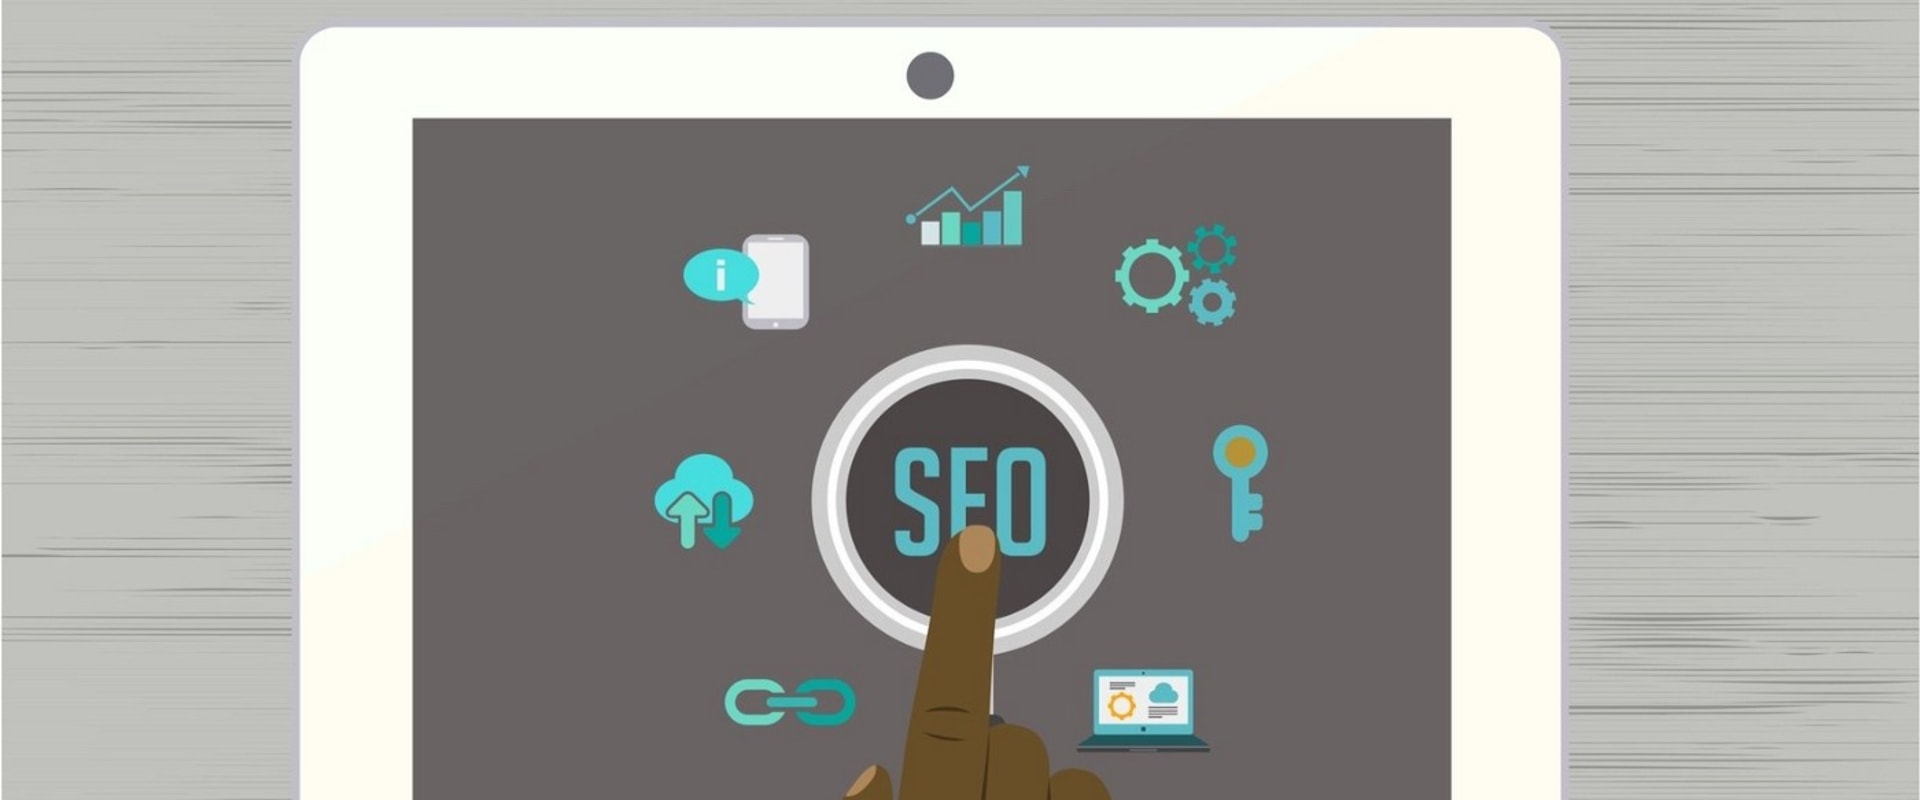 What makes a successful seo campaign?